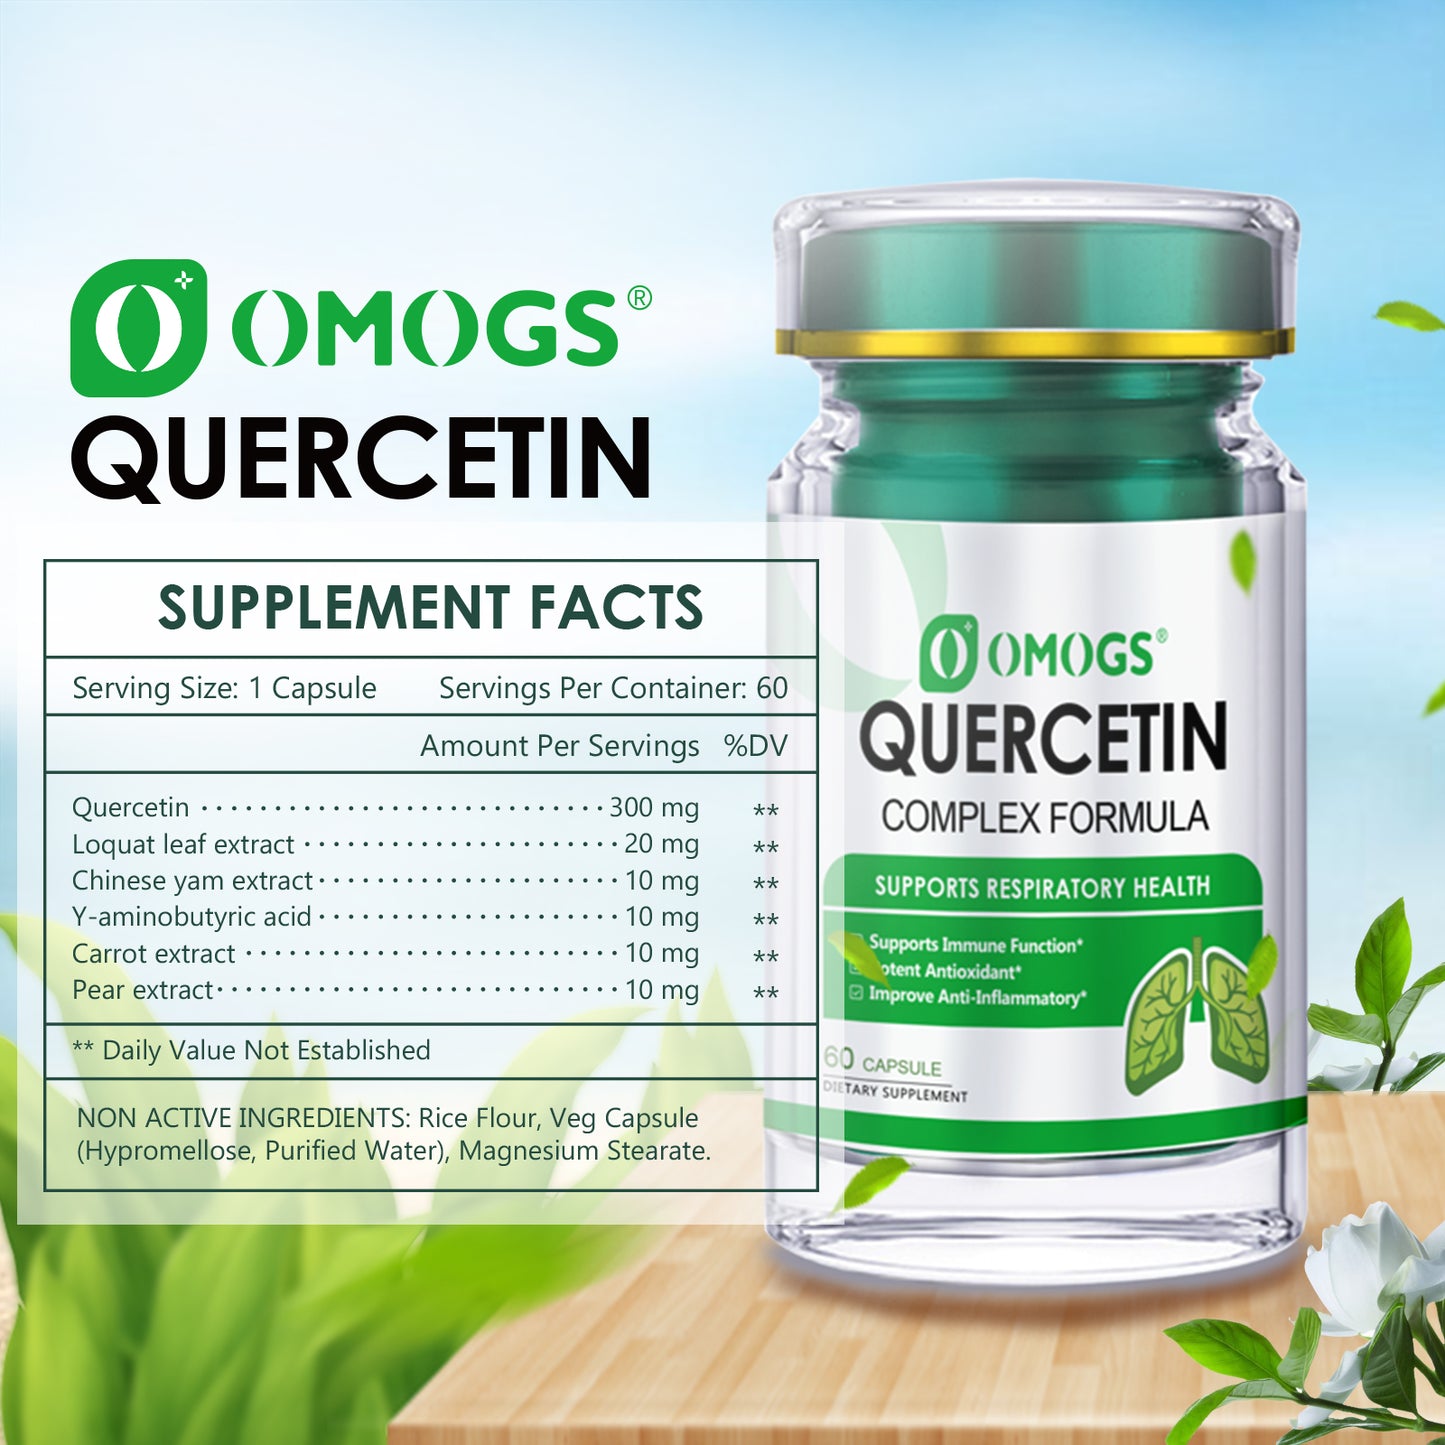 OMOGS Quercetin 300mg with Loquat Leaf Extract ,Y-aminobutyric Acid and Vitamin C, Enhance Immune,Respiratory Health,Antioxidant and Anti-Inflammatory,Natural Non GMO/Non Soy/Gluten Free, 60 Capsules